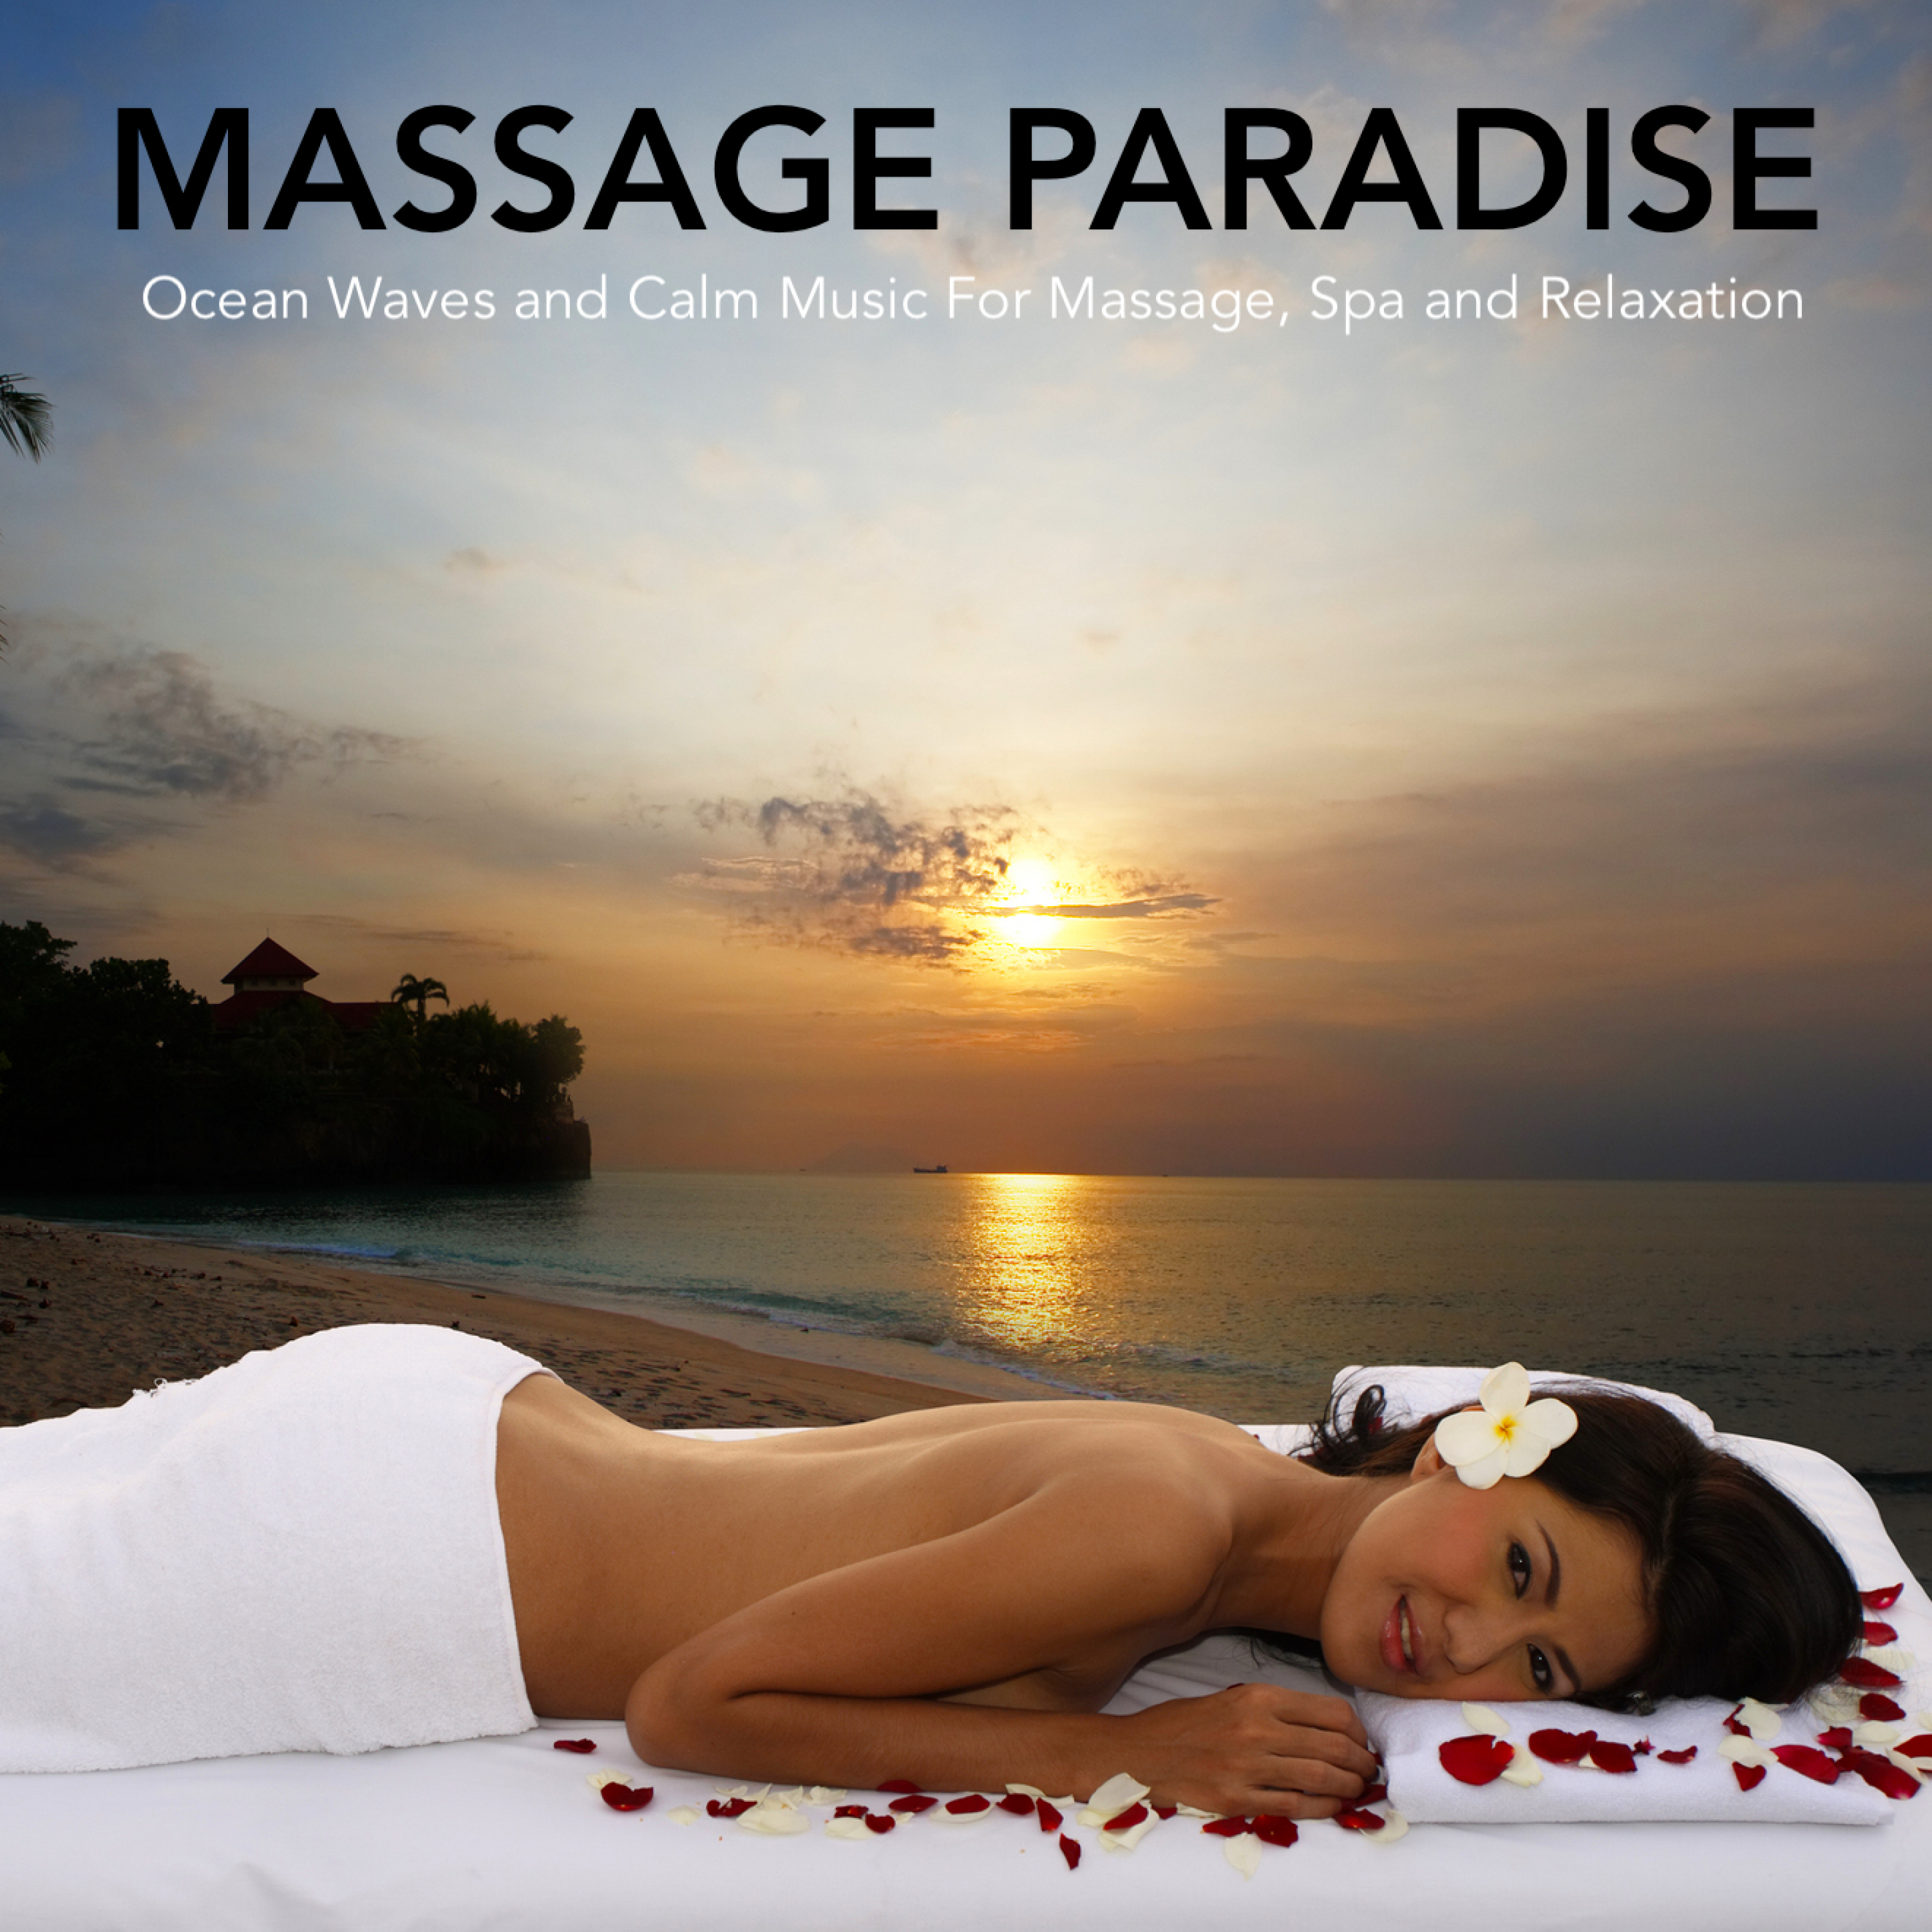 Massage Paradise: Calm Music For Massage, Spa, Meditation and Relaxation